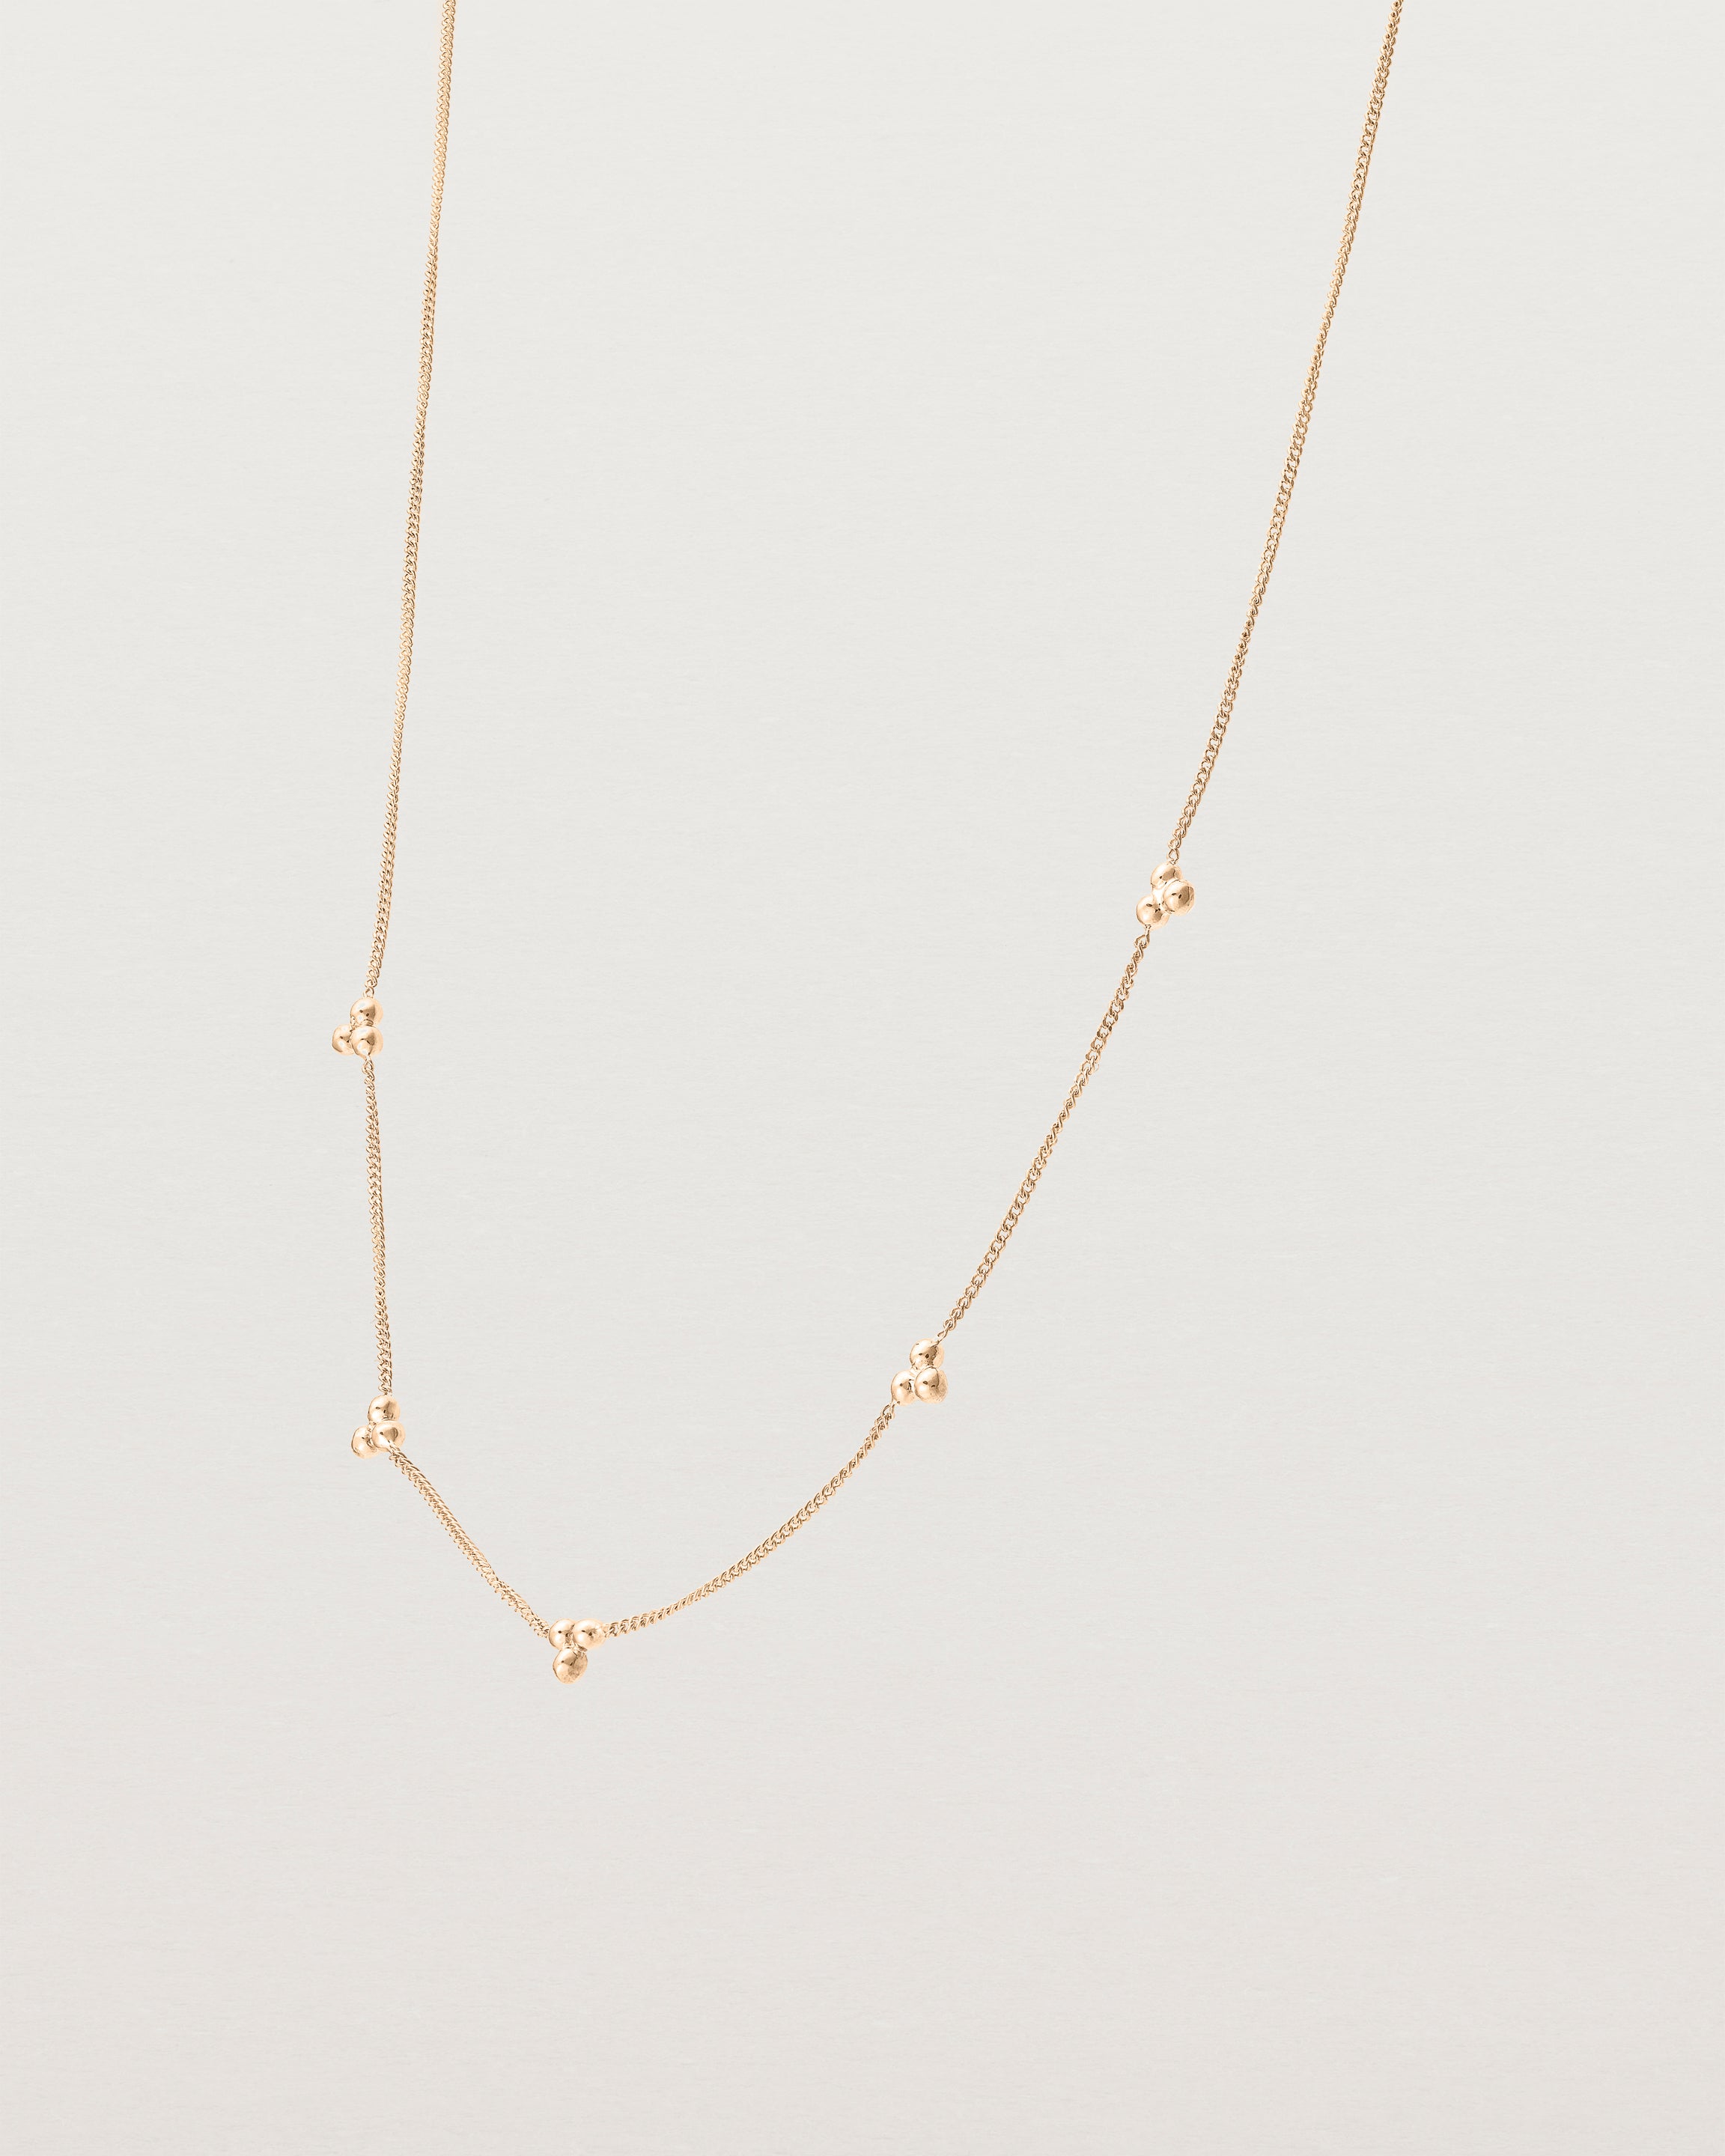 Angled view of the Tellue Necklace in rose gold.